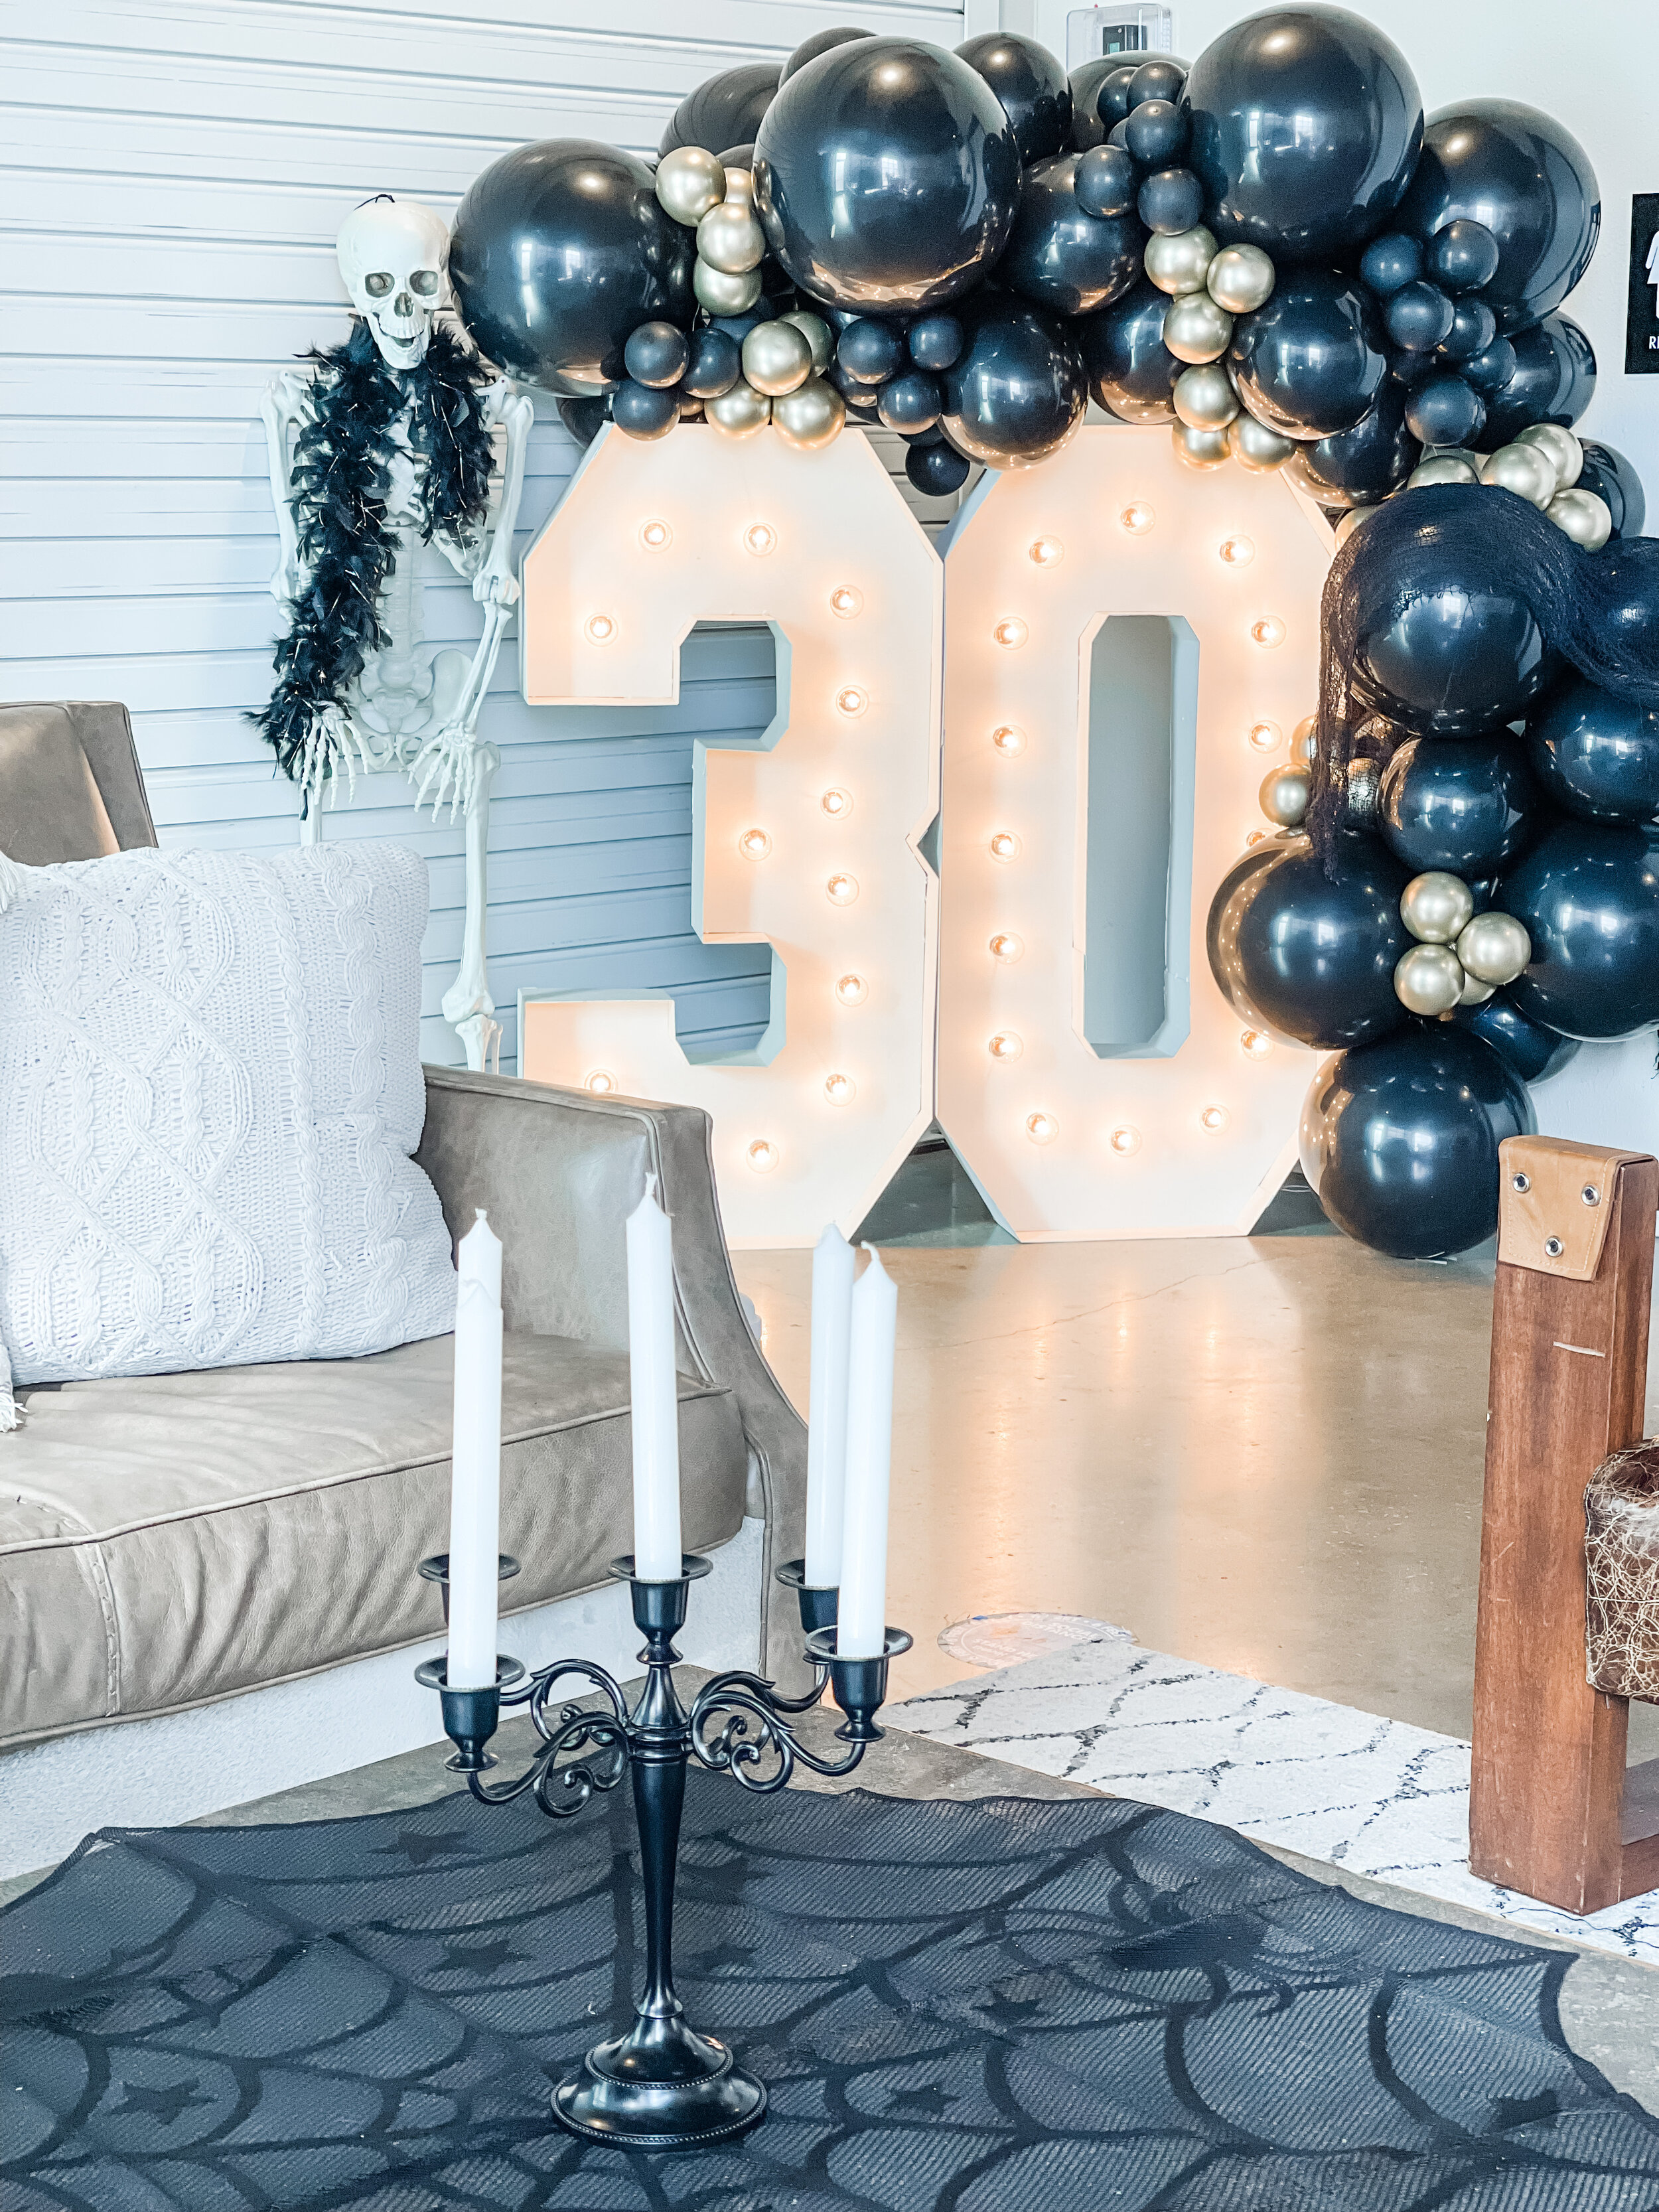 Throw a fun “Death to my Twenties” 30th Birthday Party by celebrating with giant marquee numbers! Get ideas for welcome area, drink station, food bar, decor and more now at minteventdesign.com!